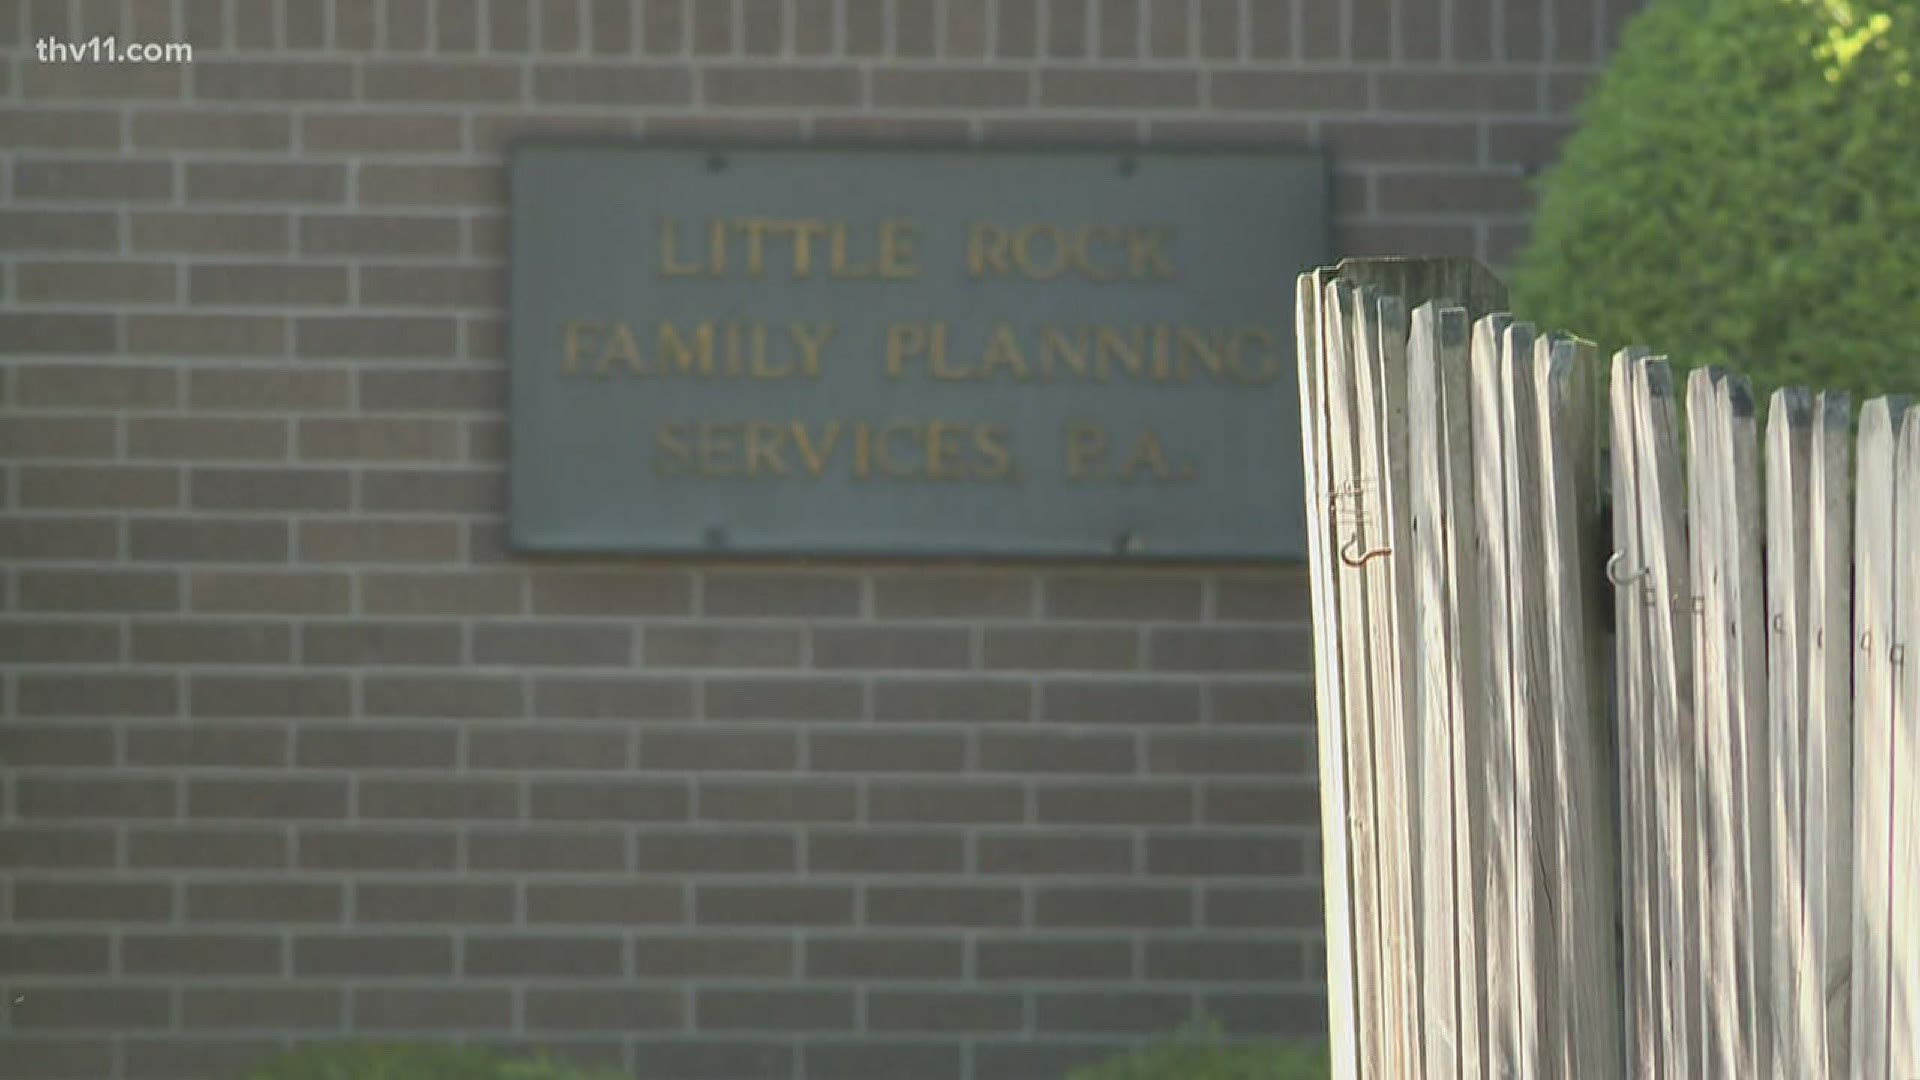 The state Department of Health issued an order to a Little Rock clinic to stop surgical abortions immediately.